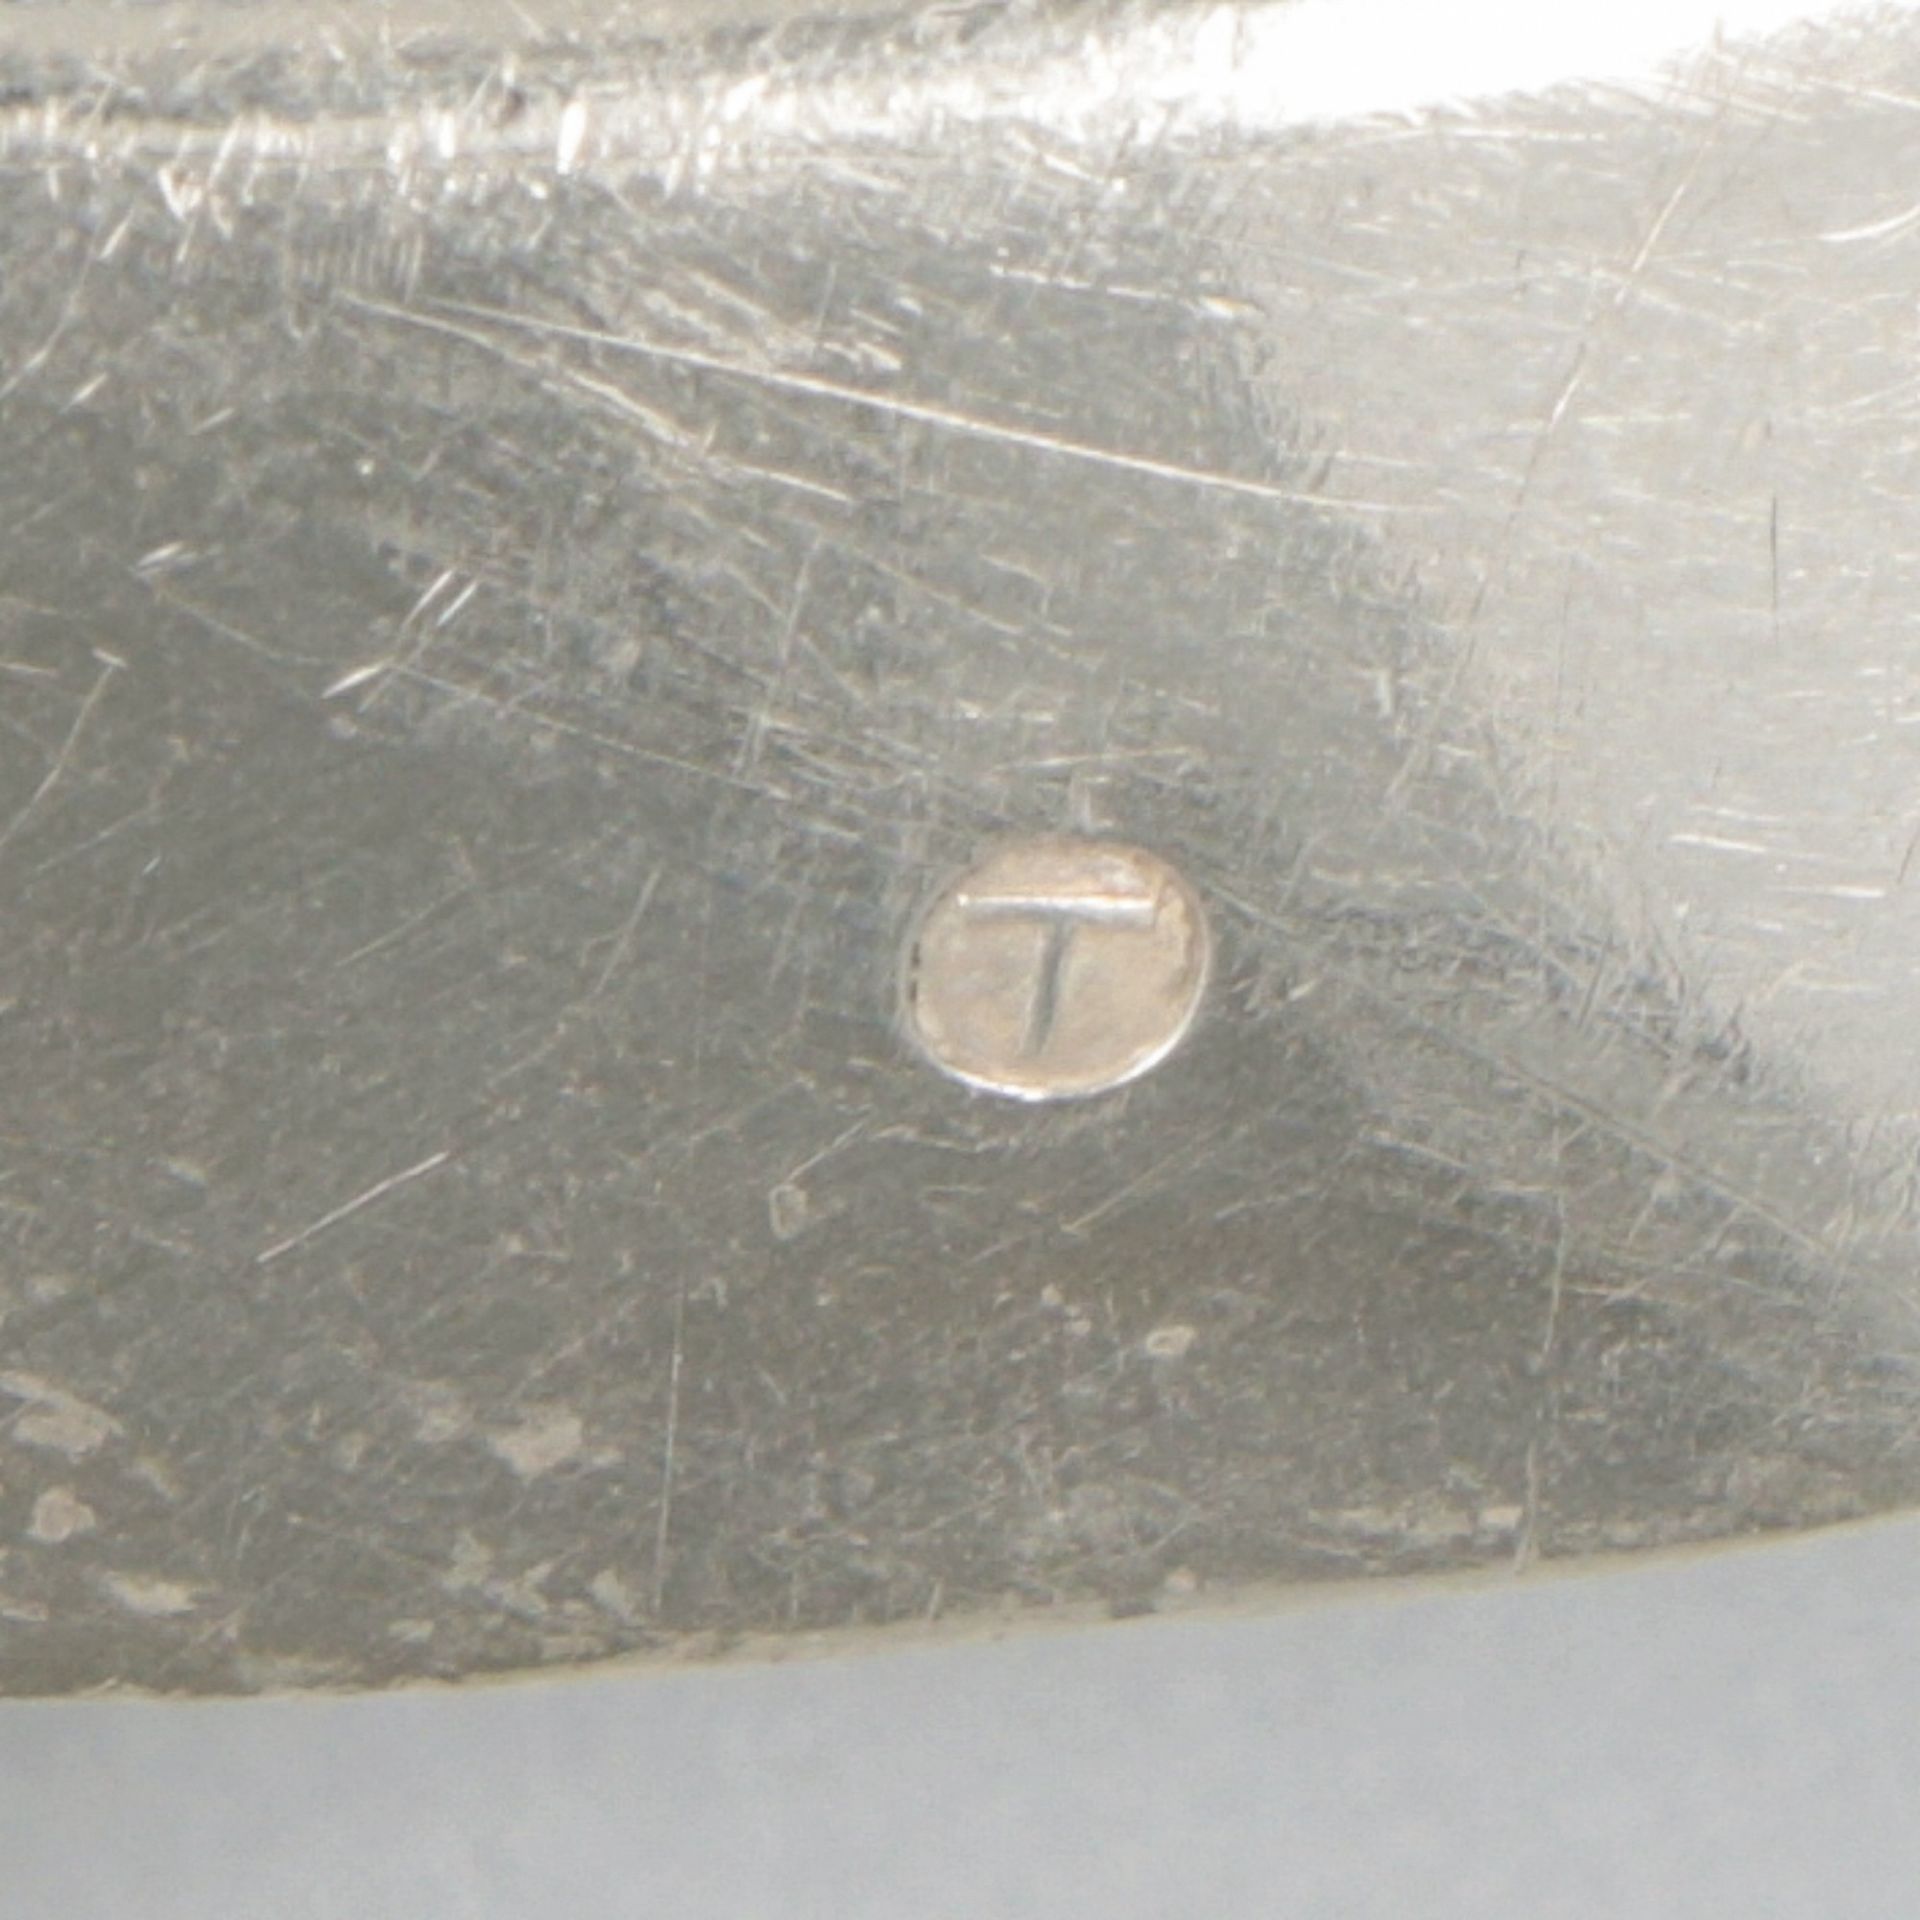 Fried egg scoop silver. - Image 6 of 6